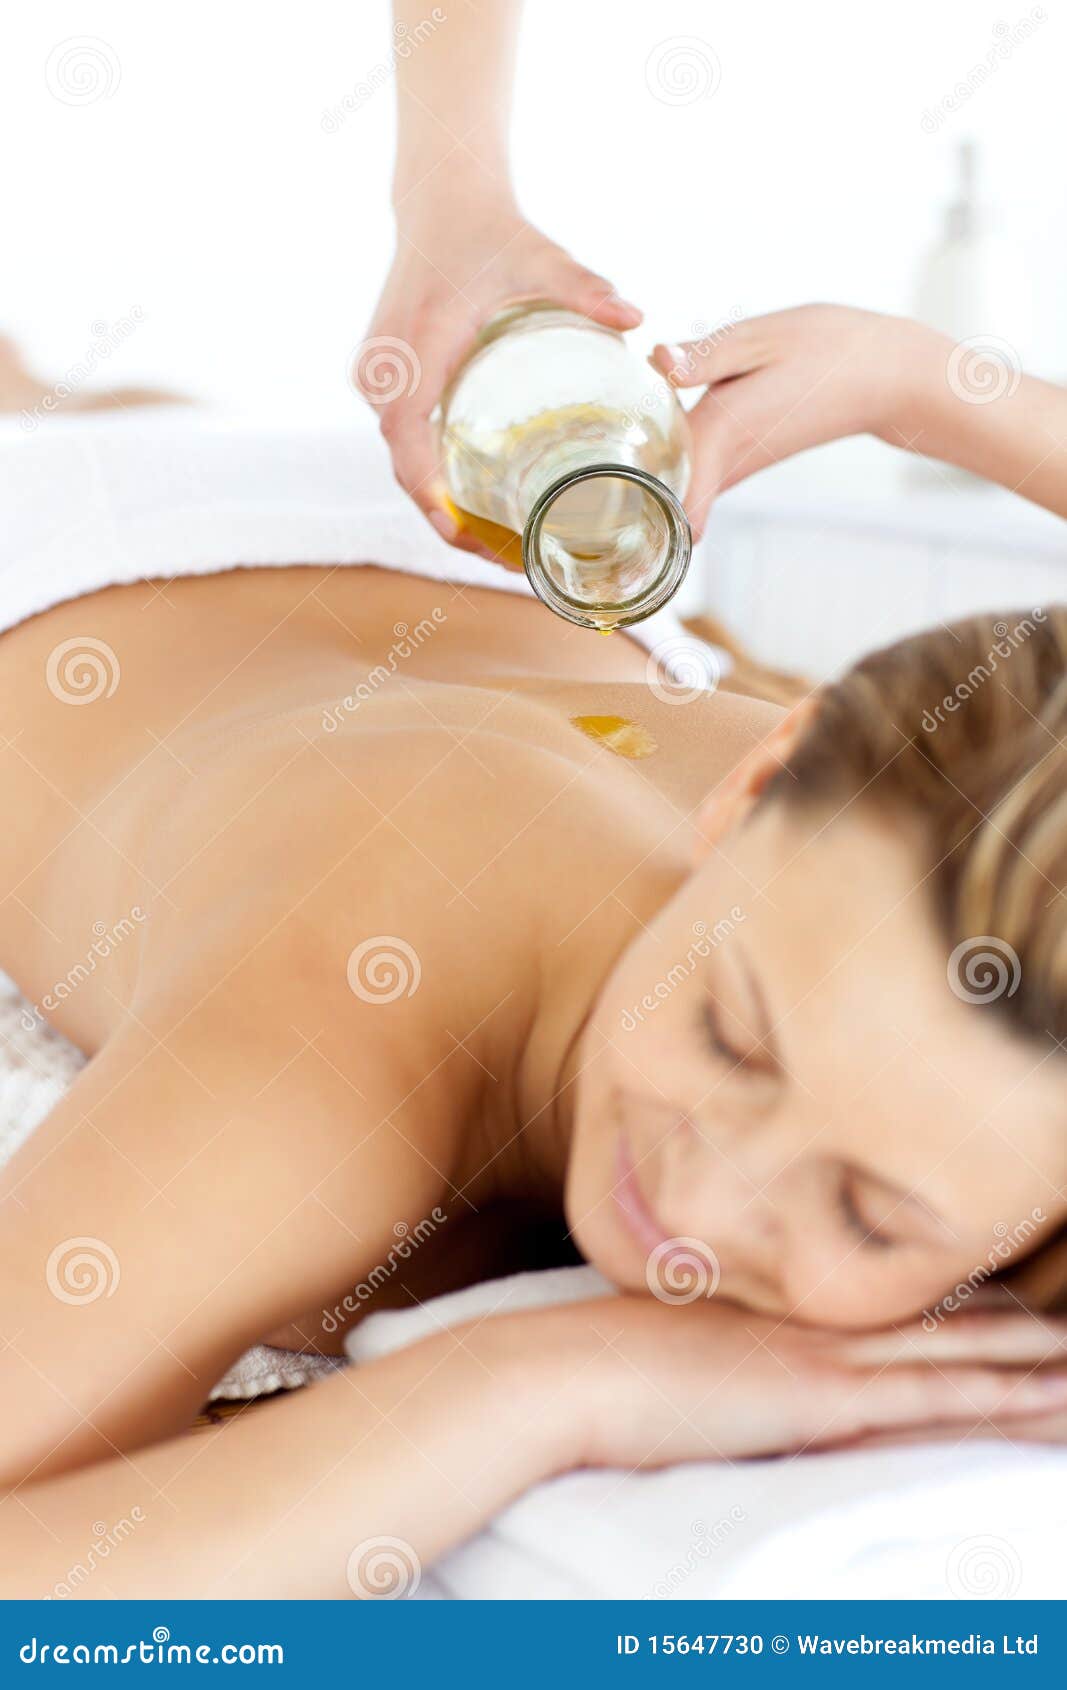 glad young woman enjoying a back massage with oil